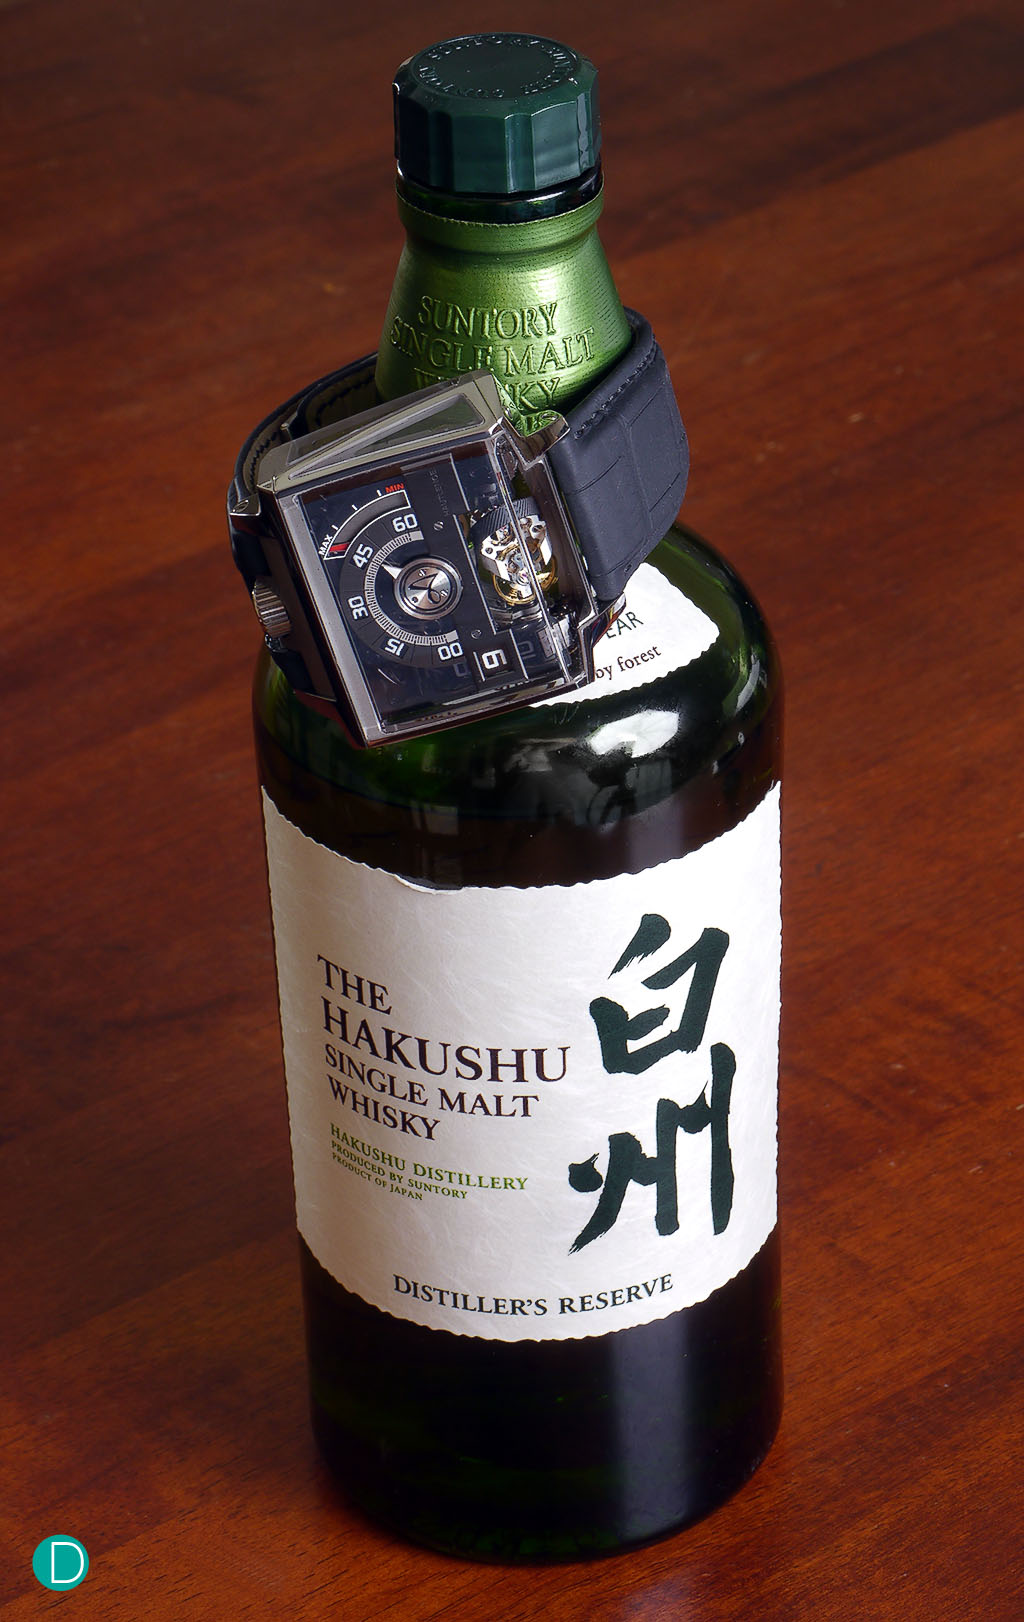 We know Hautlence CEO Guillaume Tetu prefers Islay Scotch for his drink, but we think the Vortex does go rather well with the disruptive effects the Japanese whisky industry have been creating with the likes of this Hakushu Single Malt.